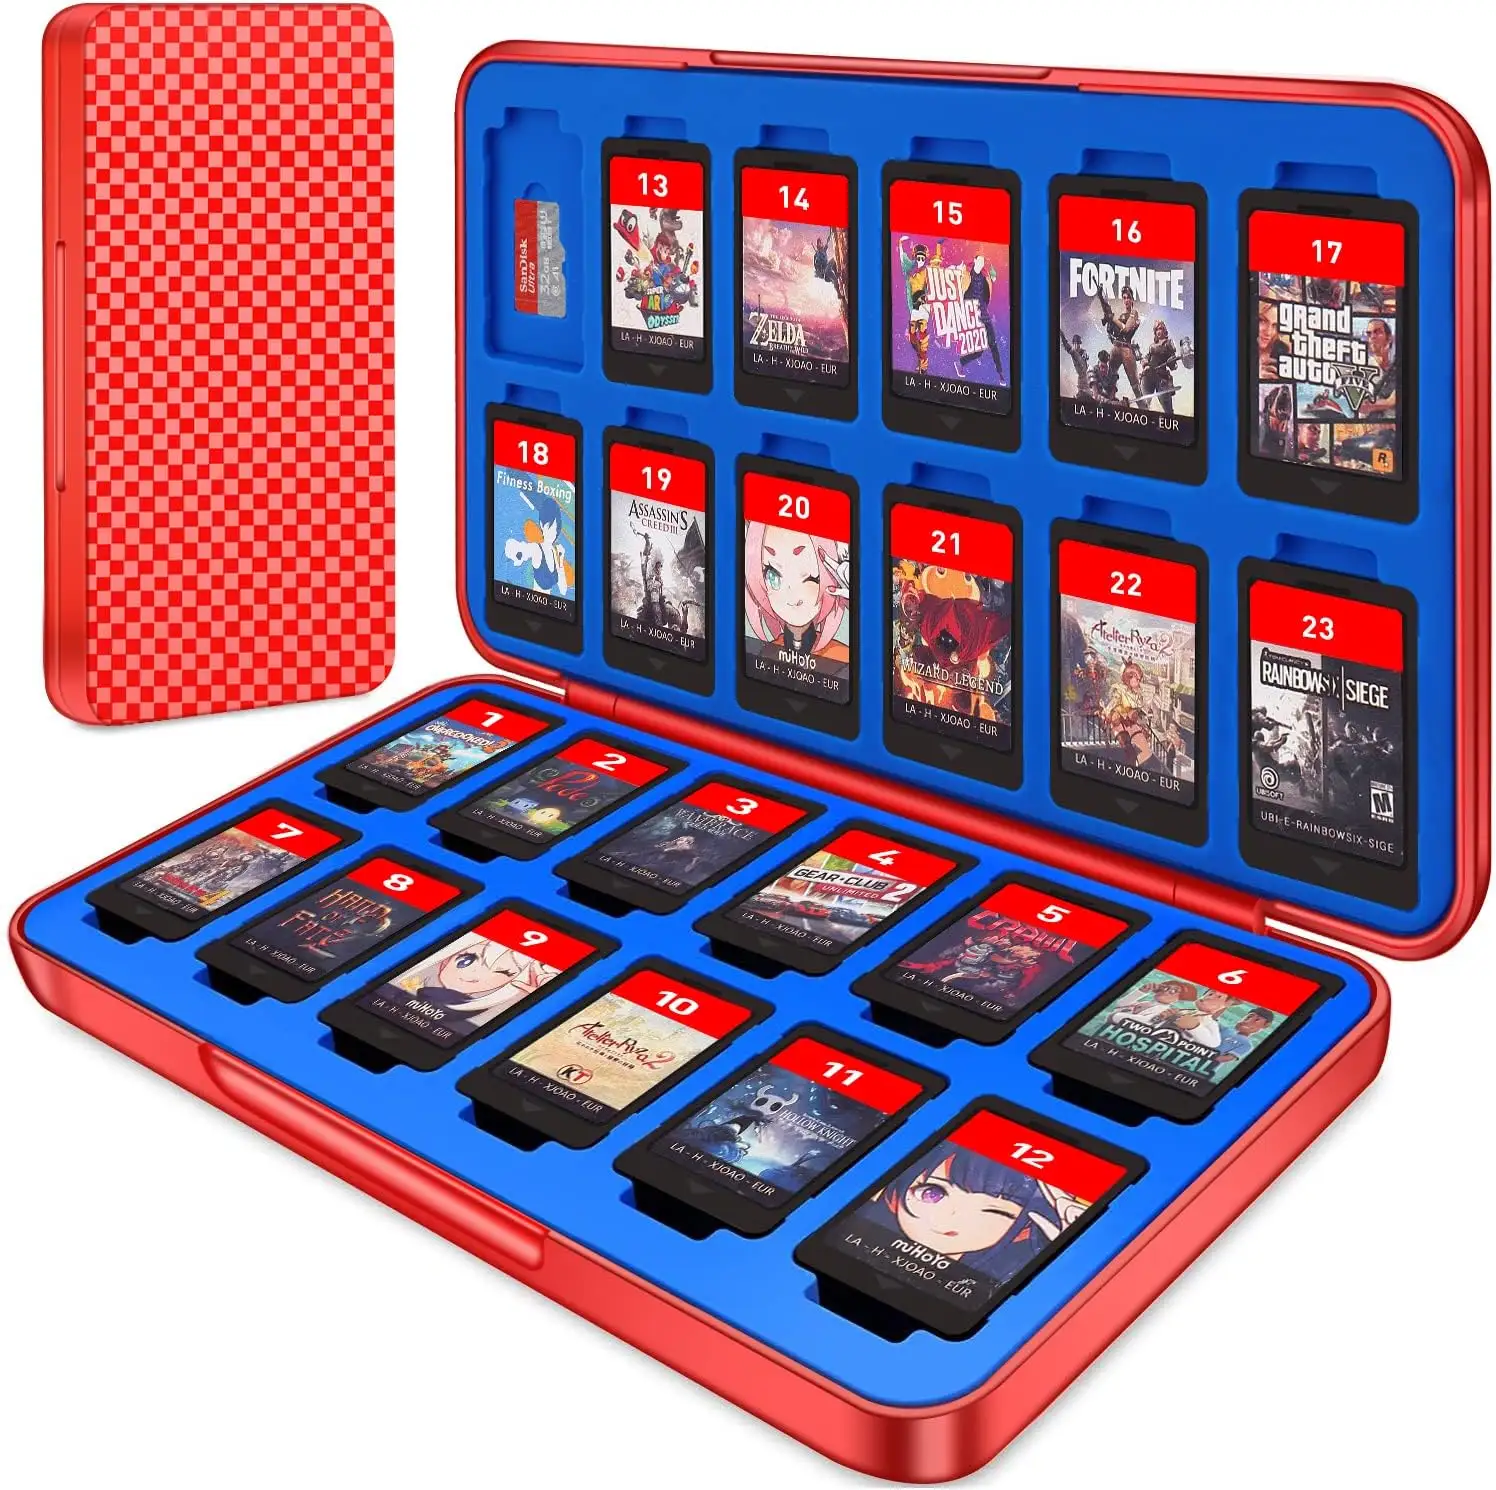 Honson 24 In1 Game Card Case Voor Nintendo Switch/Switch Lite Opbergbox Sd Card Case